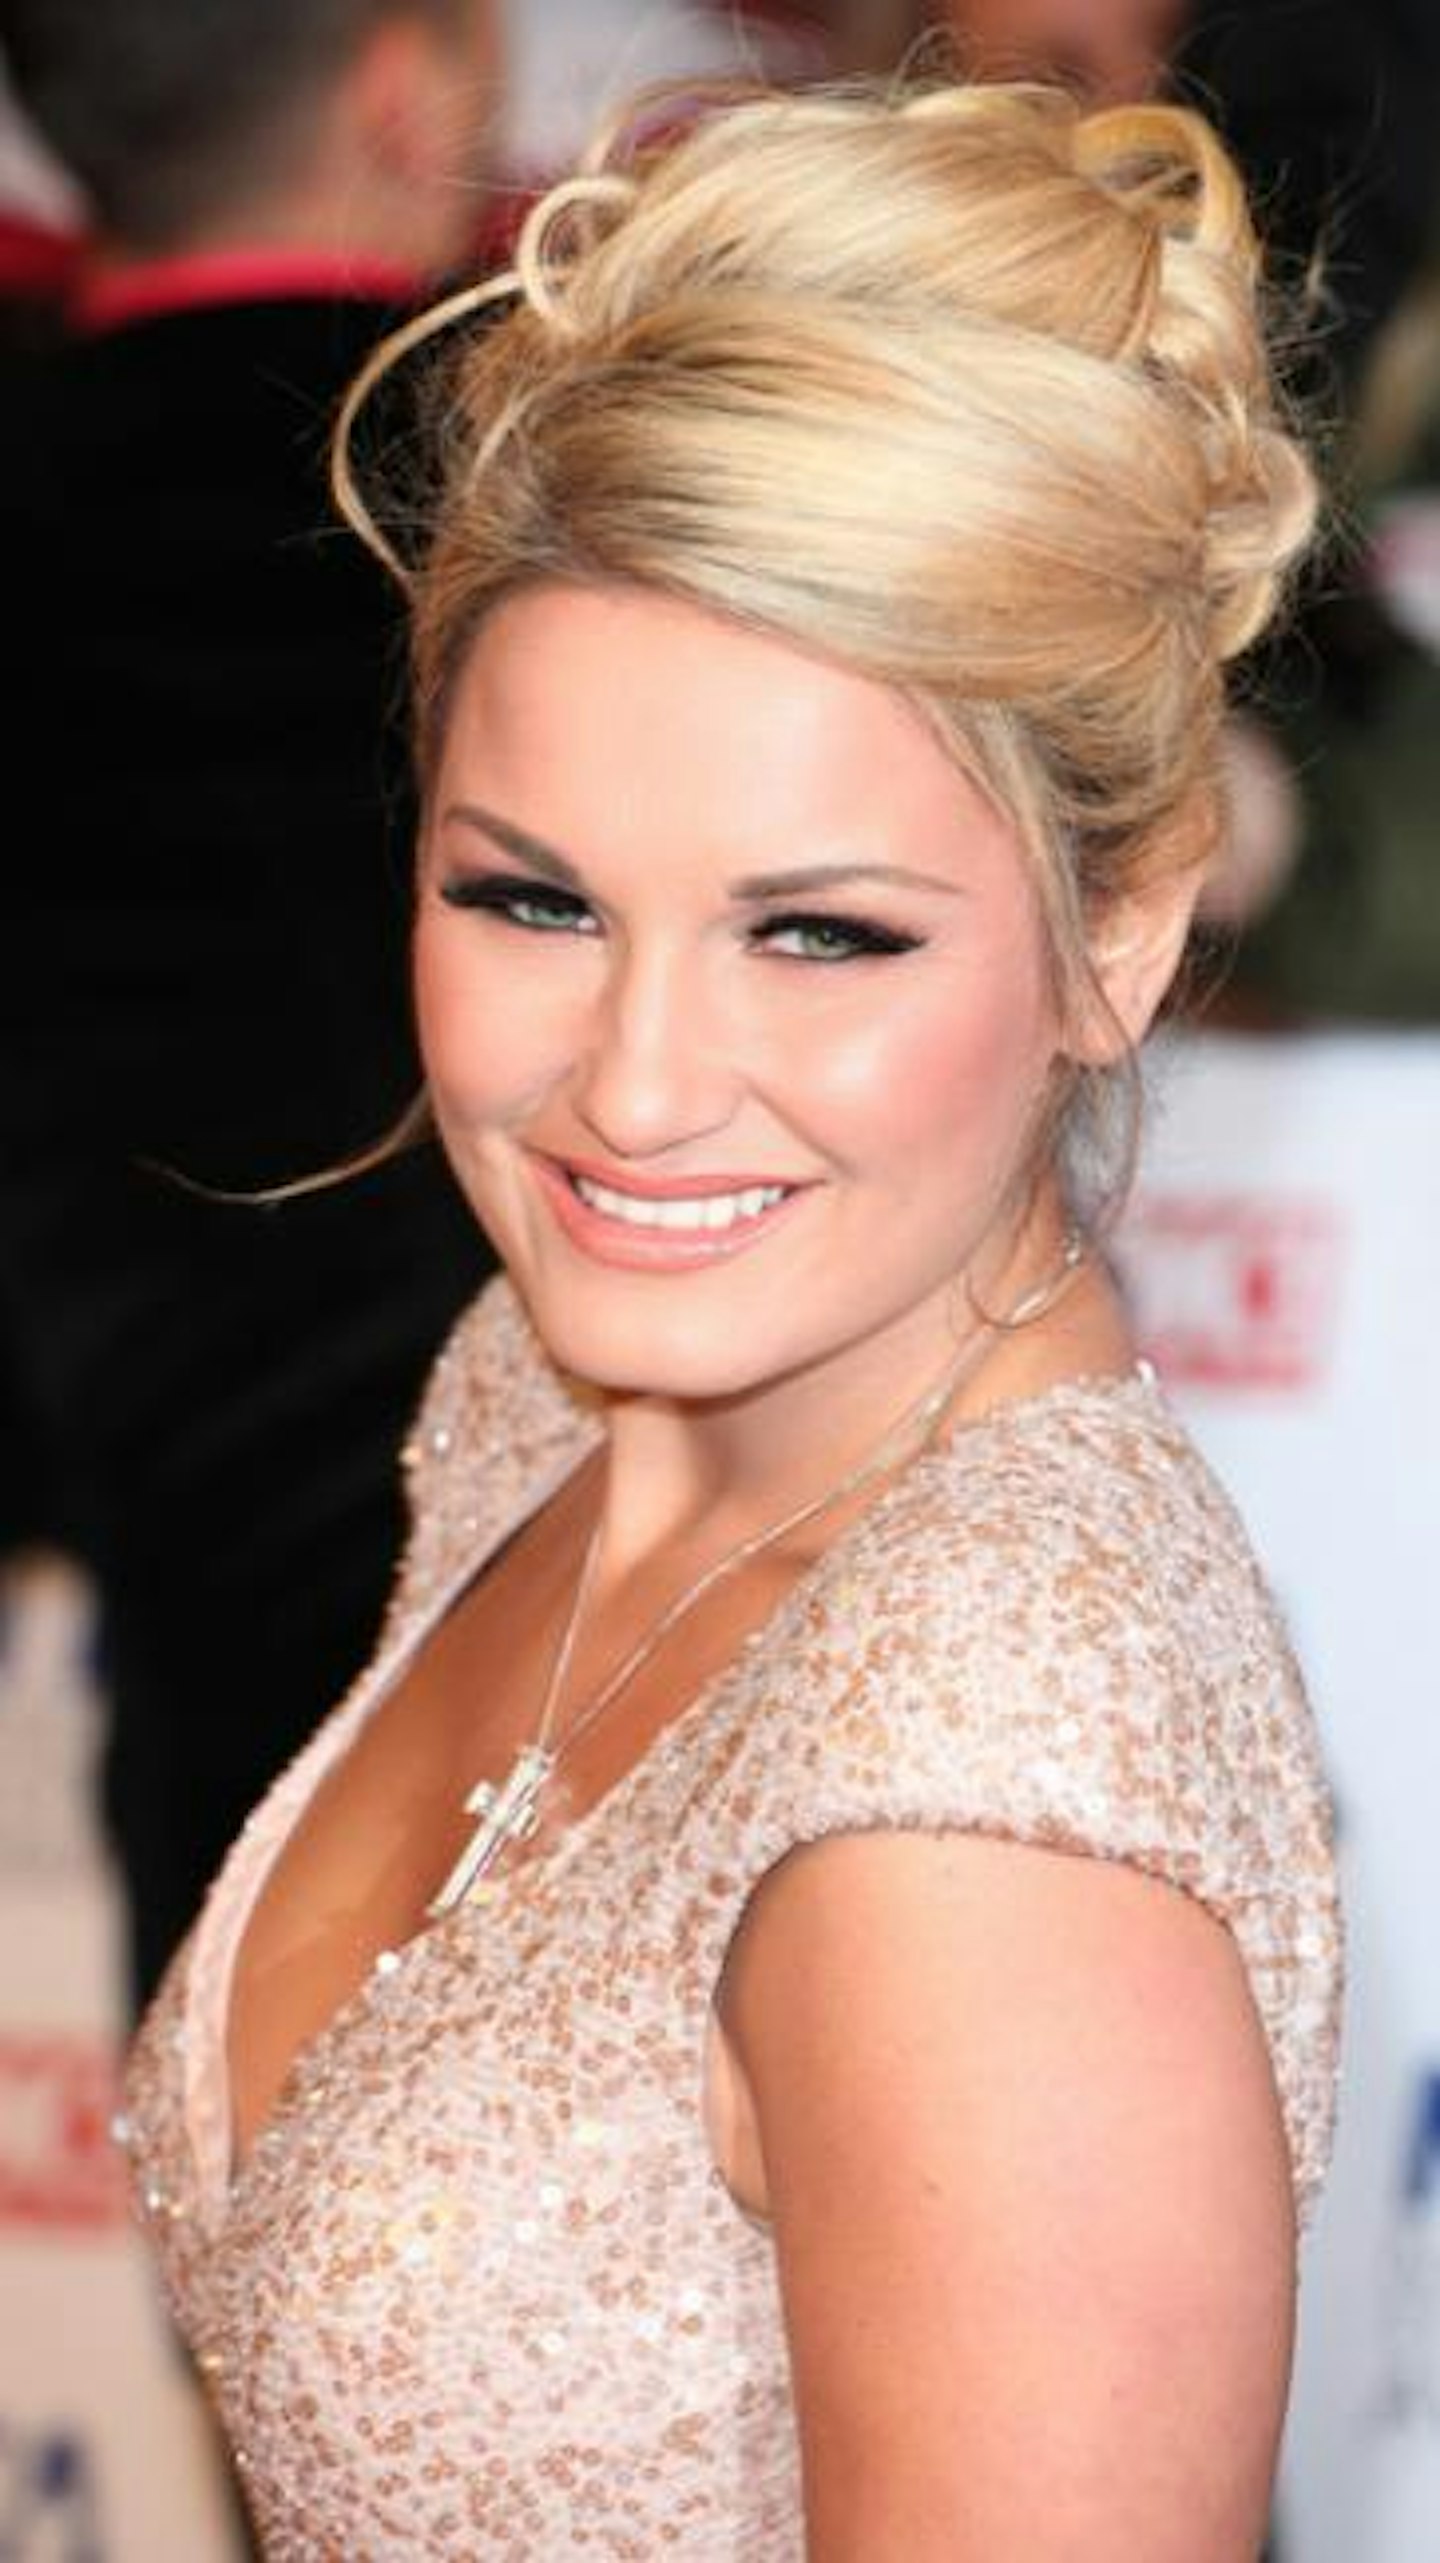 Sam Faiers is a sufferer of Trichotillomania (pulling of hair/eyelashes) which is linked to stress